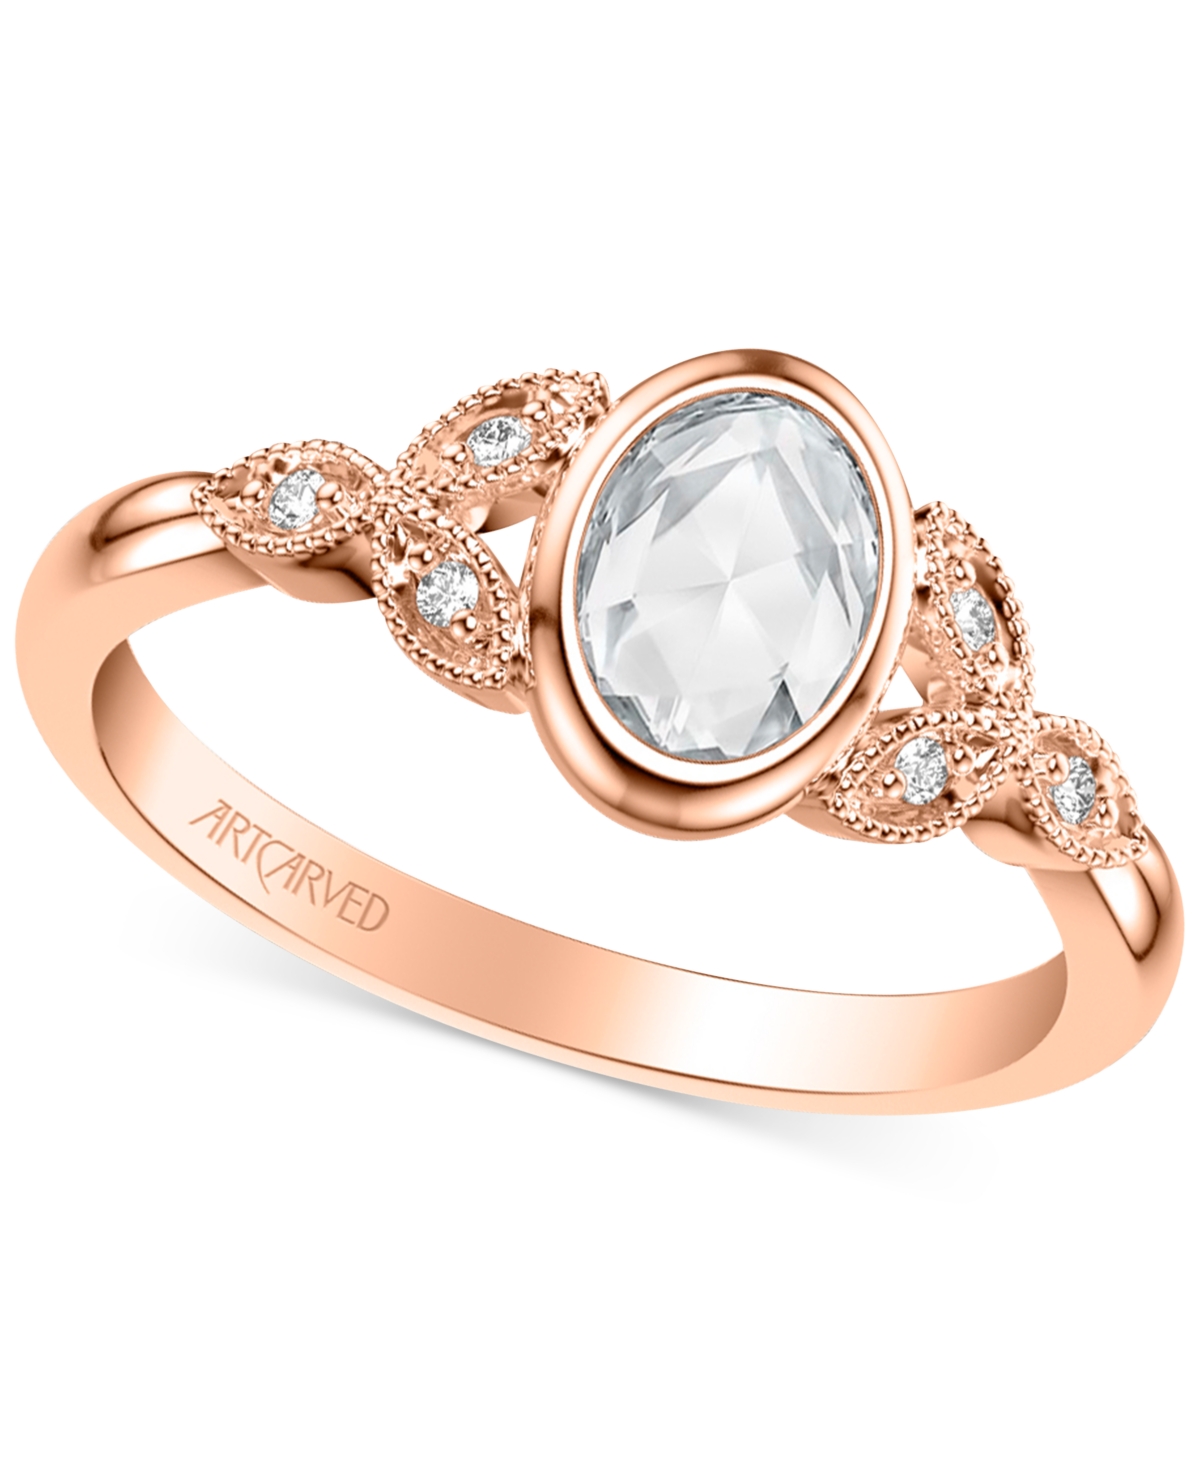 Artcarved Art Carved Diamond Rose-Cut Bezel Openwork Engagement Ring (1/2 ct. t.w.) in 14k White, Yellow or Rose Gold